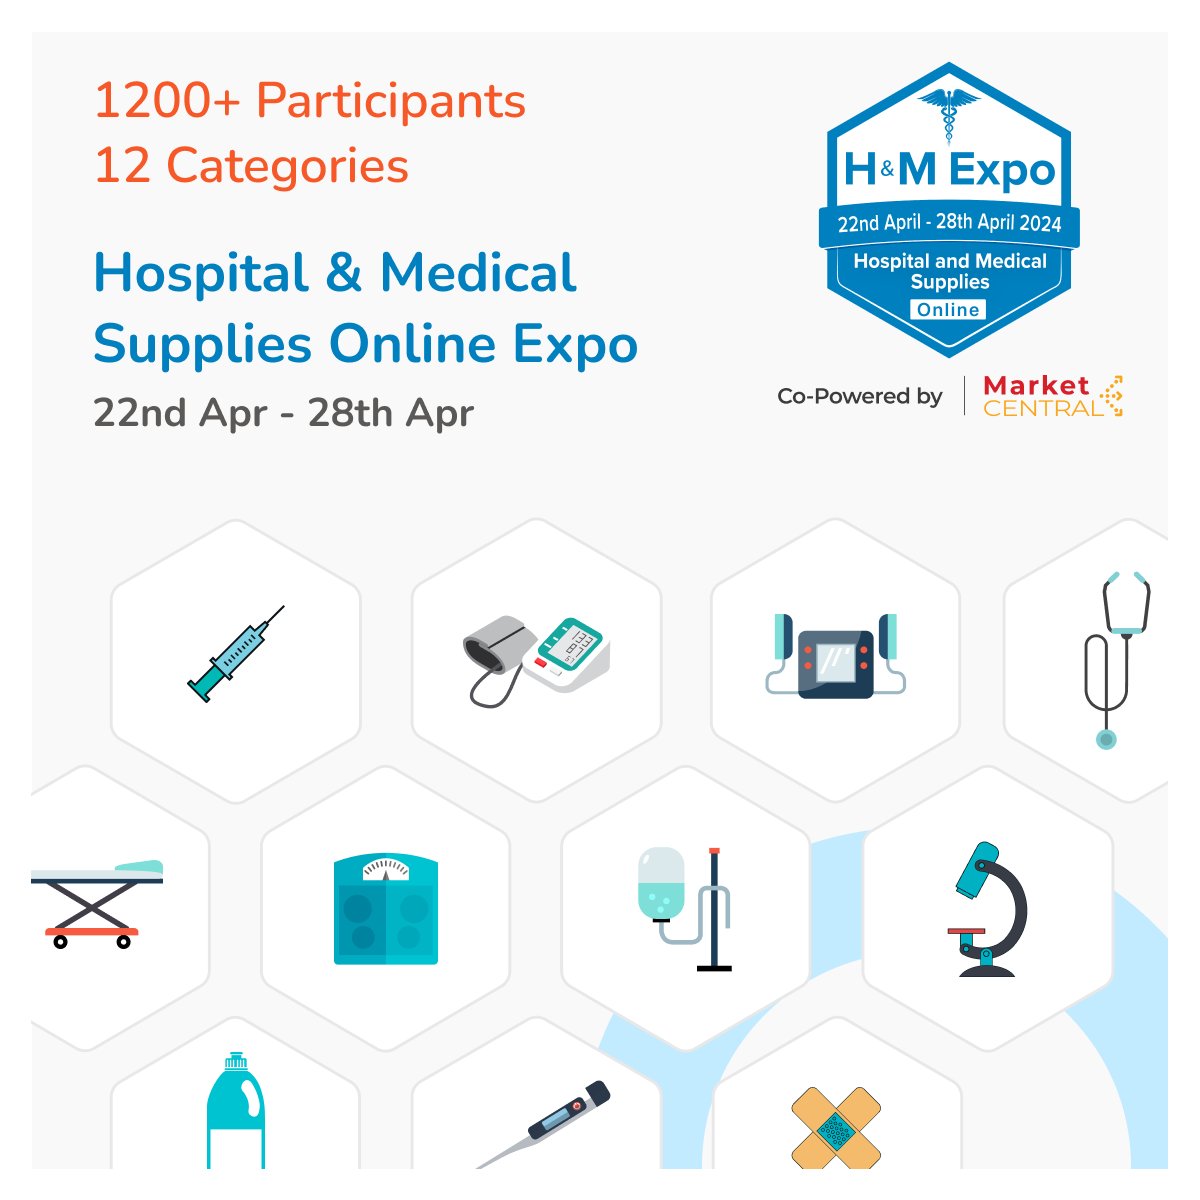 Download the H&MExpo catalogue to get a preview of India's BIGGEST B2B + B2C Online Expo!

Download here: marketcentral.in/mela/adPageInd…

#OnlineExpo #onlineexpo #onlineexhibition #HospitalSupplies #hospitalsupplies #medicalsupplies #onlinebusiness #MSME #msme #marketcentral

Edit